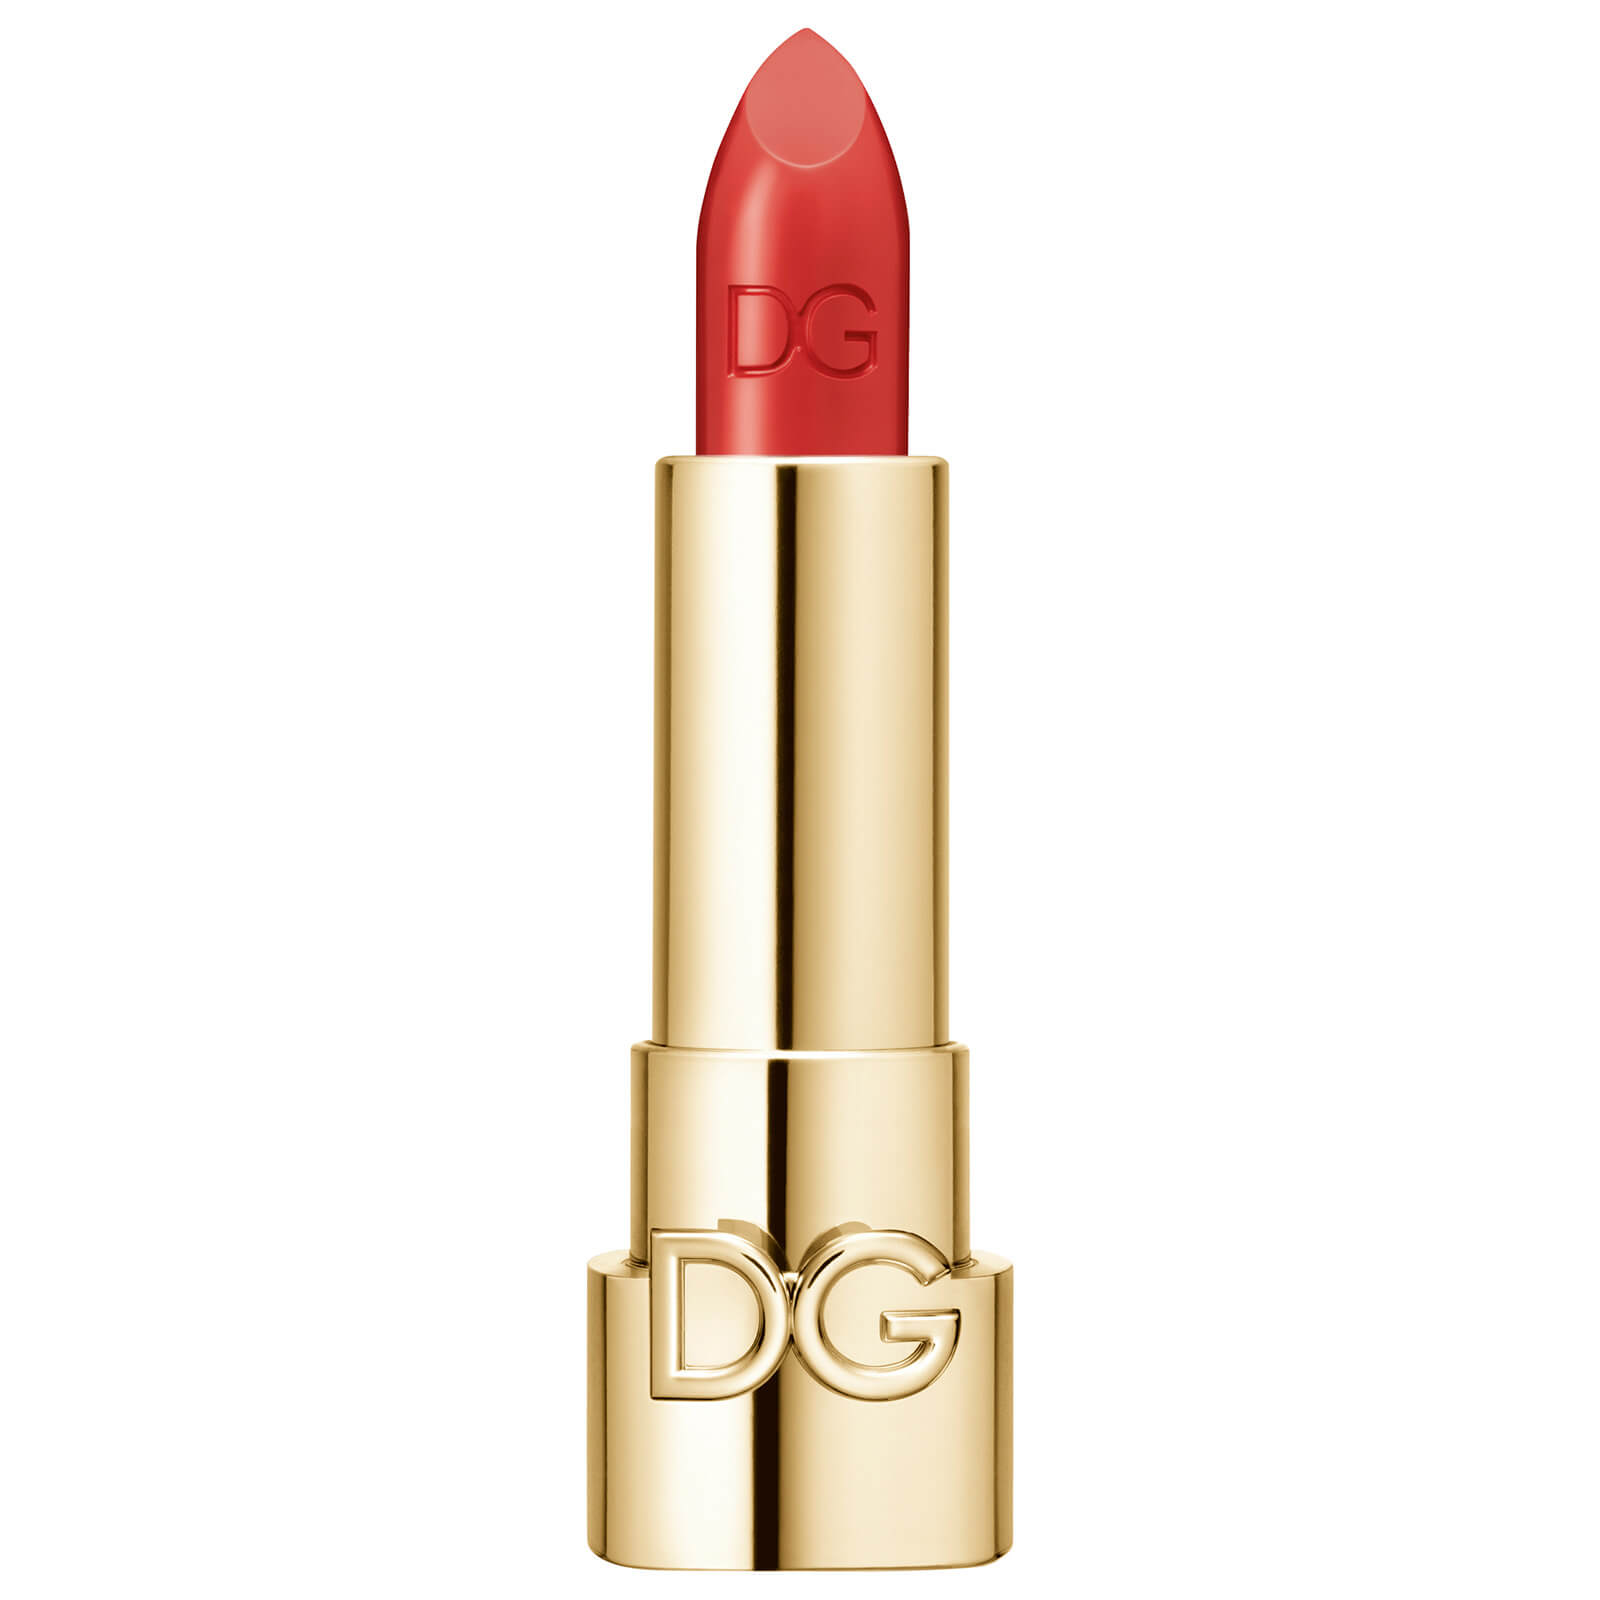 dolce&gabbana the only one lipstick 1.7g (no cap) (various shades) - 620 dg queen